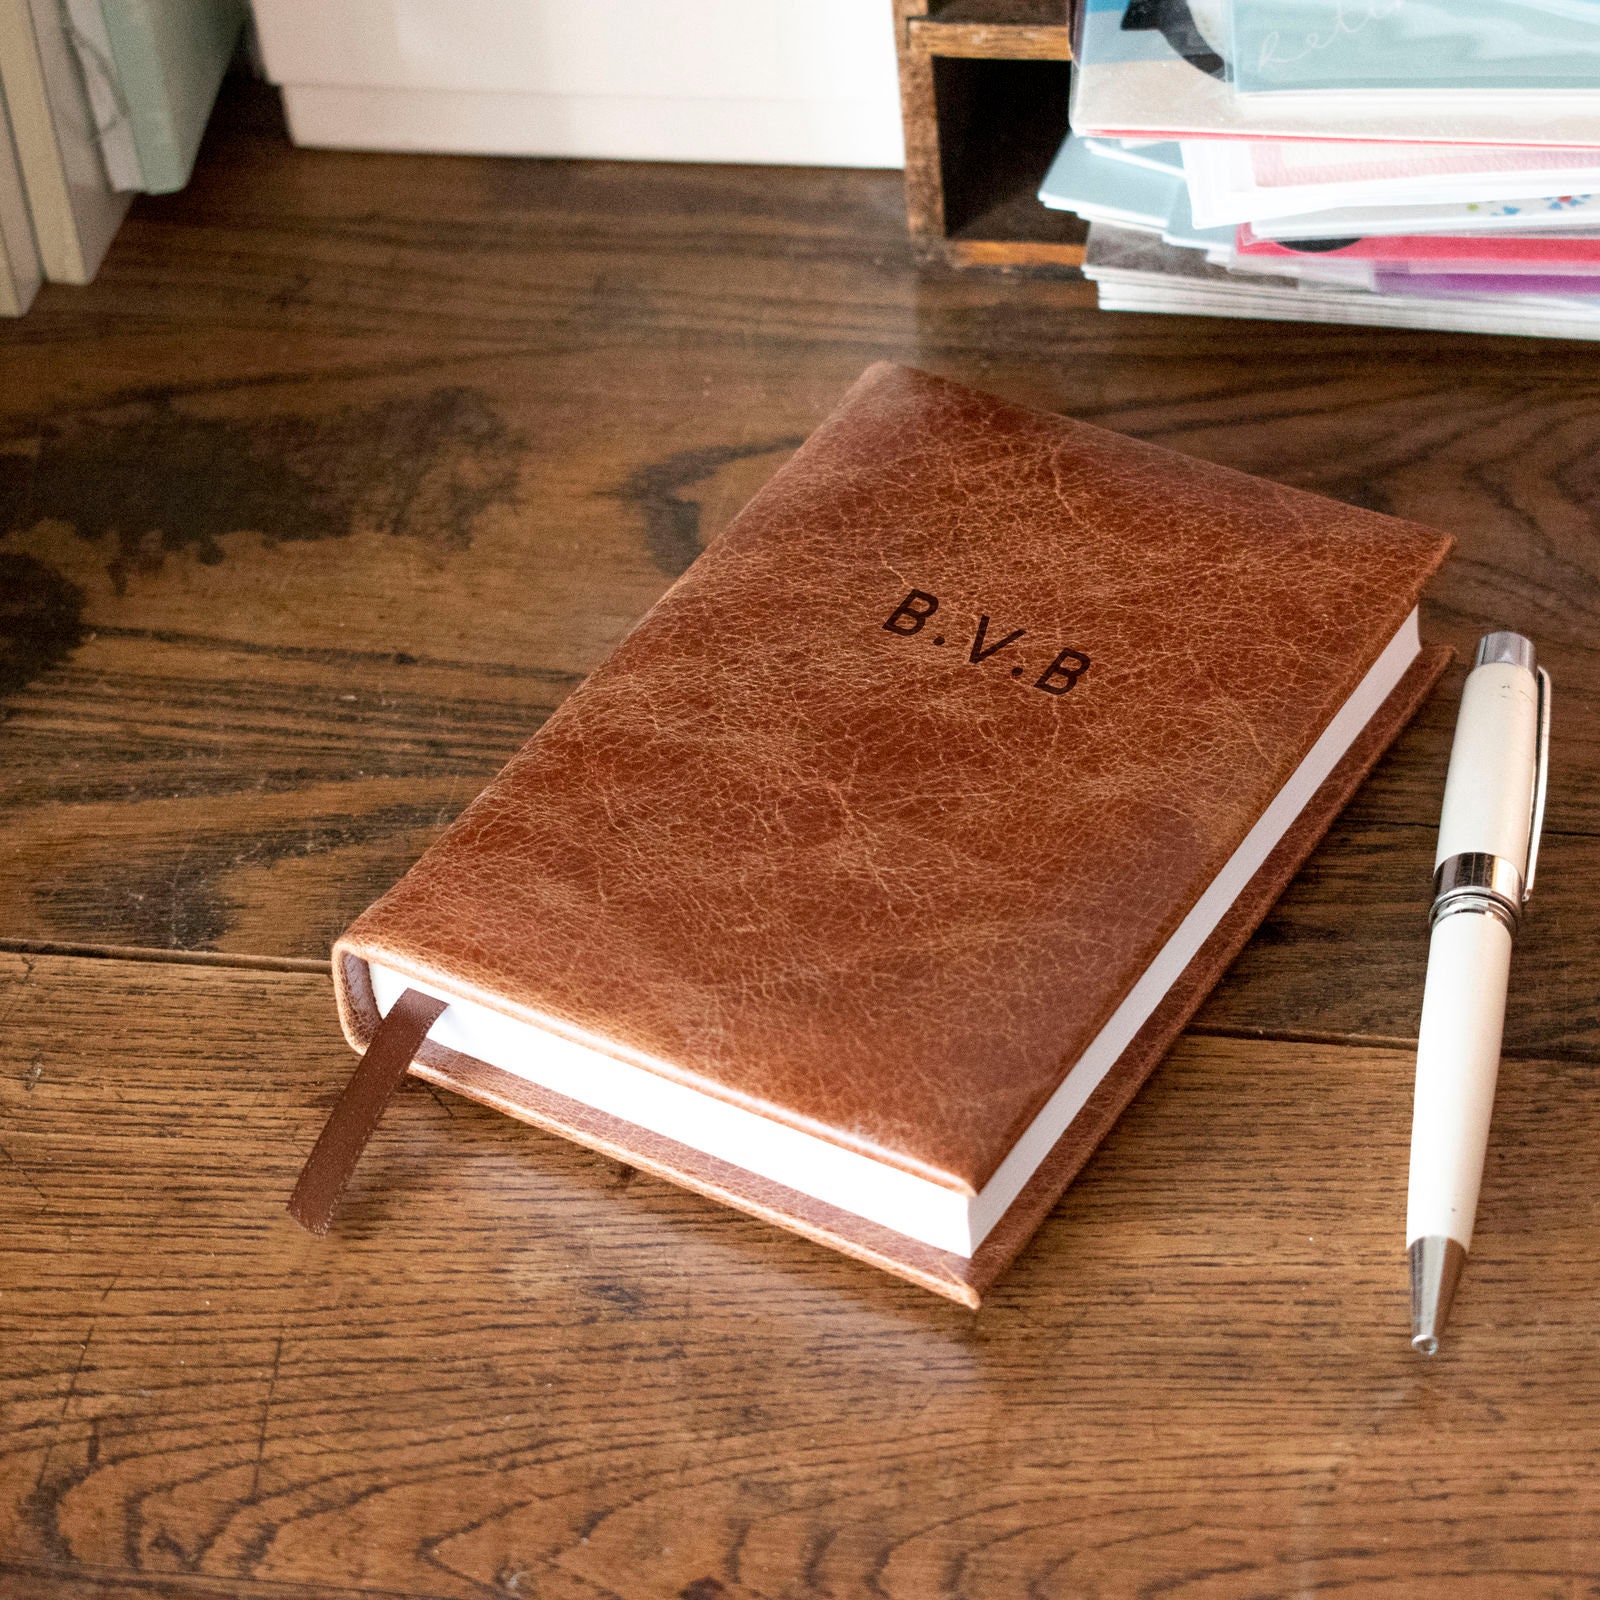 A Line a Day 5 Year Recycled Leather Diary, Vintage Looking for